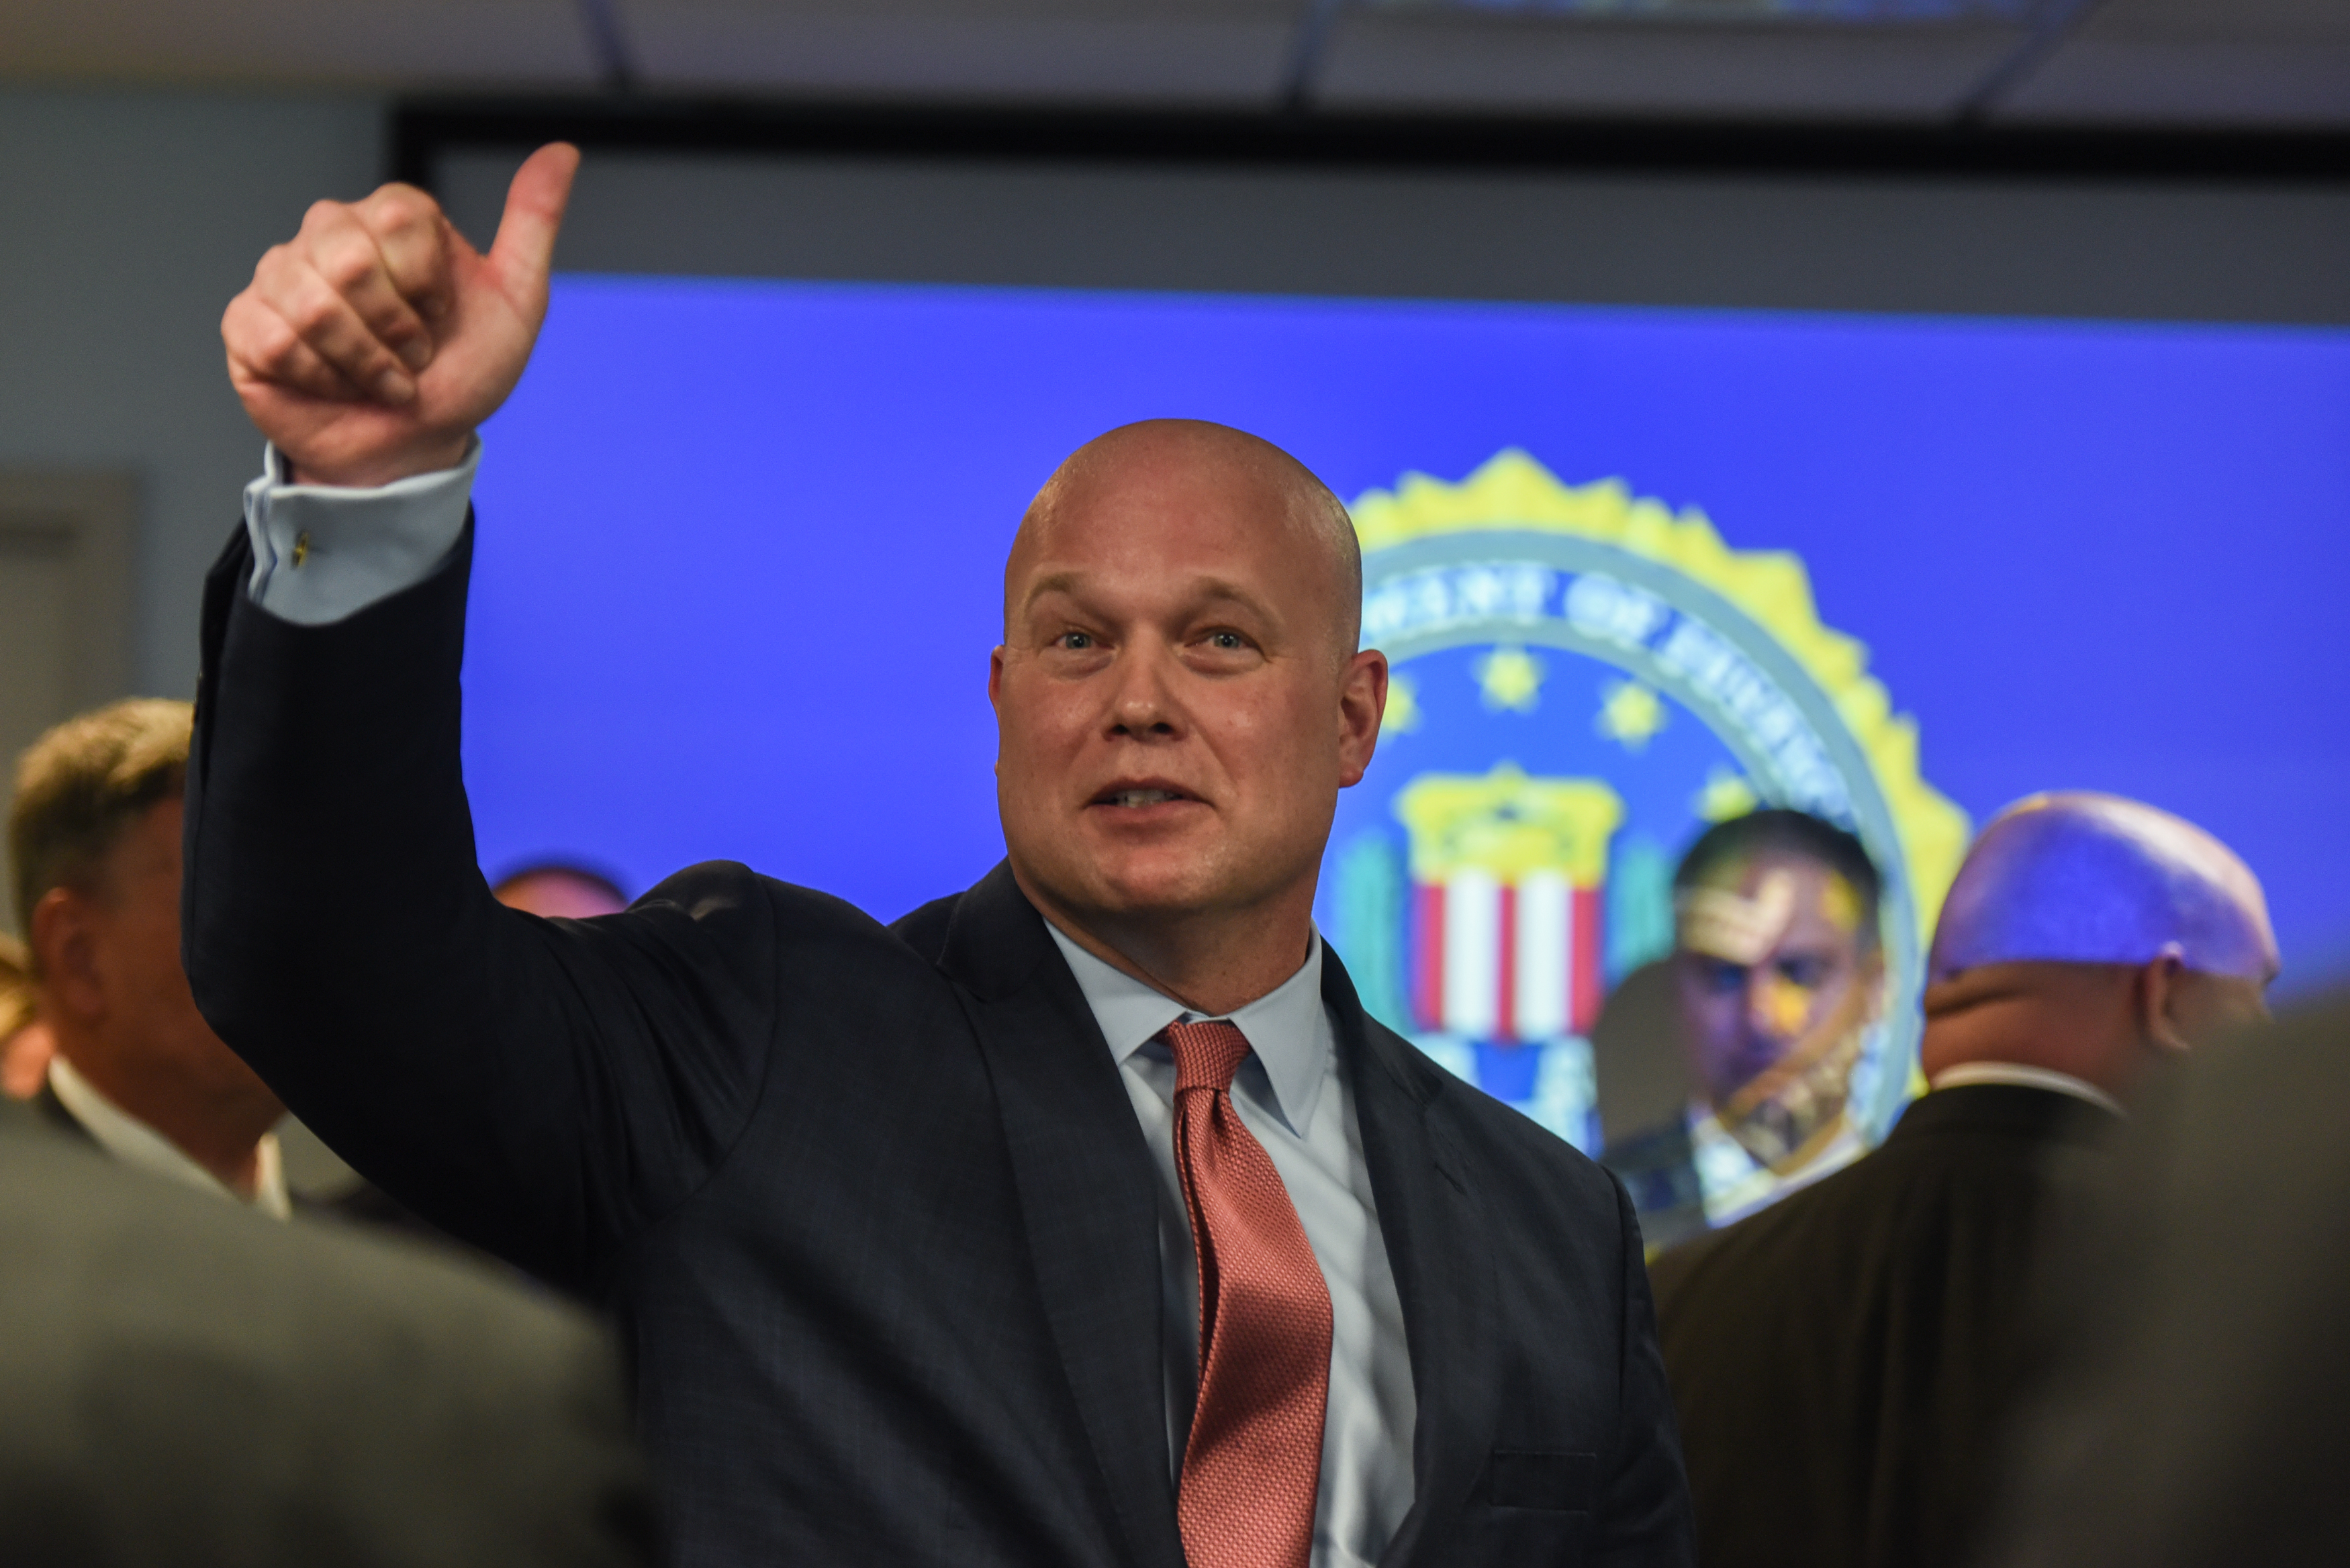 Acting Attorney General Matthew Whitaker delivers remarks to the Joint Terrorism Task Force on November 21, 2018 in New York City. (Photo by Stephanie Keith/Getty Images)